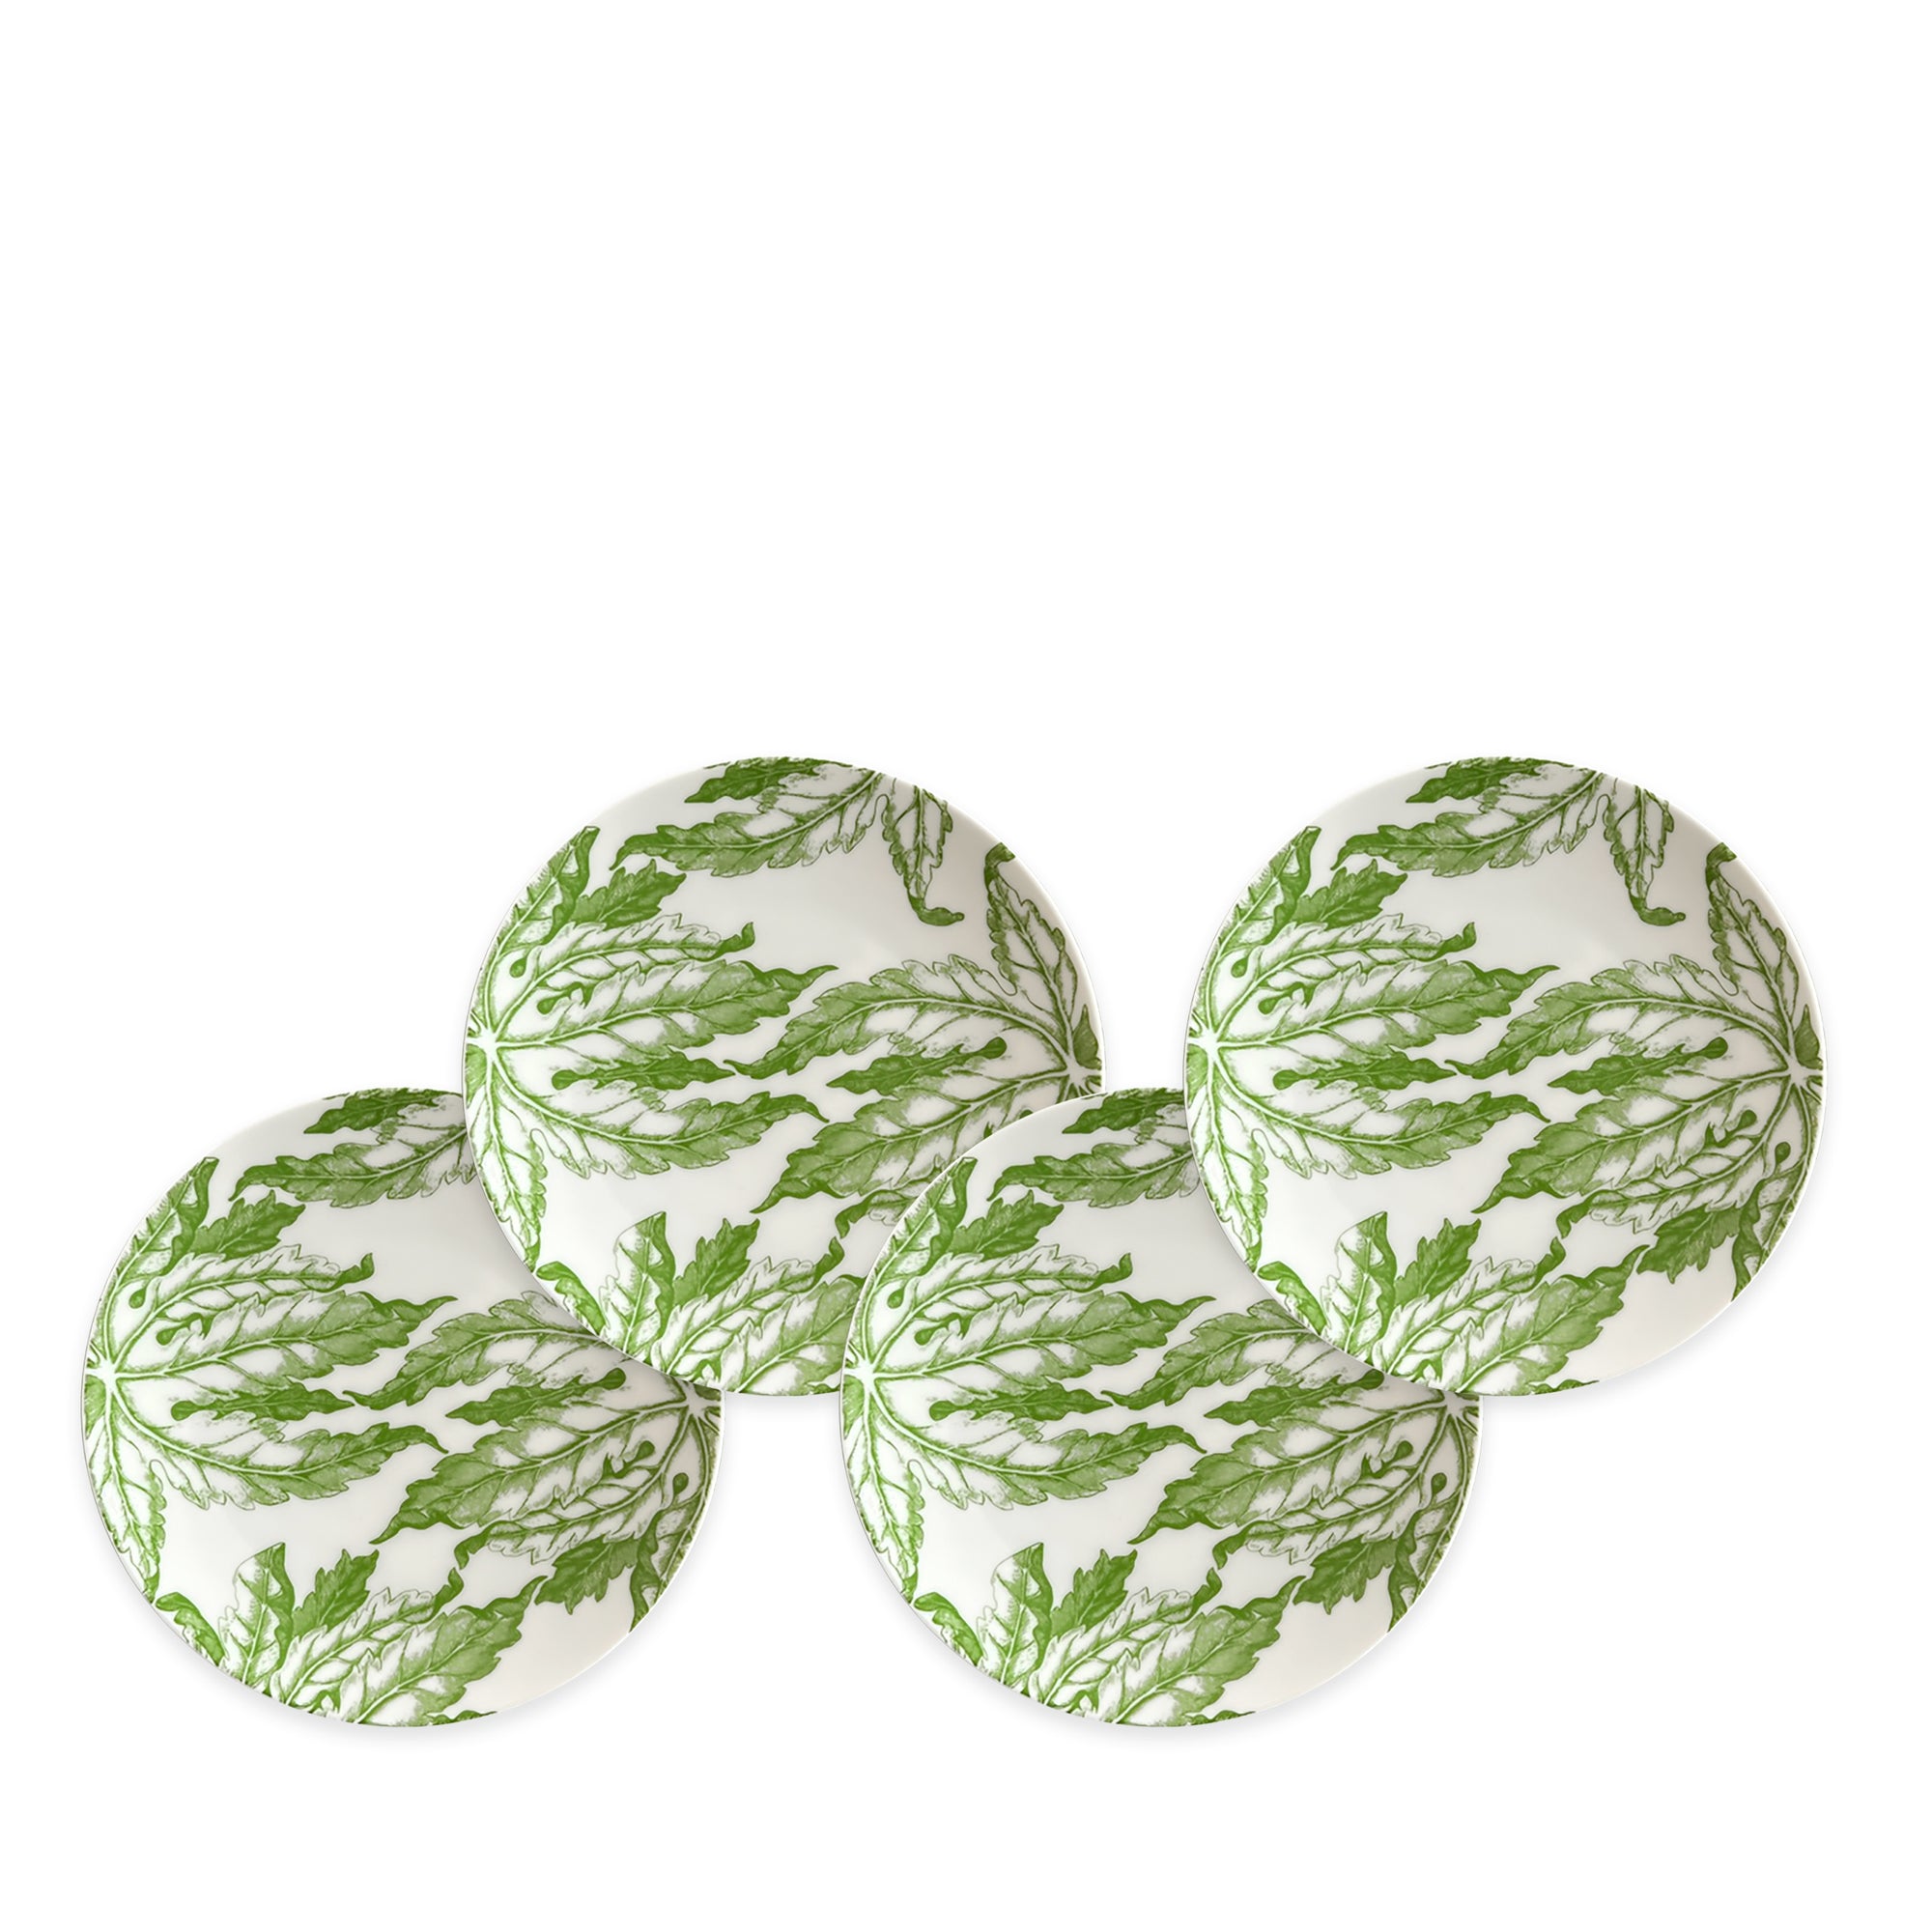 A set of four Freya Small Plates by Caskata Artisanal Home with green floral patterns is arranged closely together on a white background. This heirloom-quality dinnerware features elegant designs perfect for any occasion.